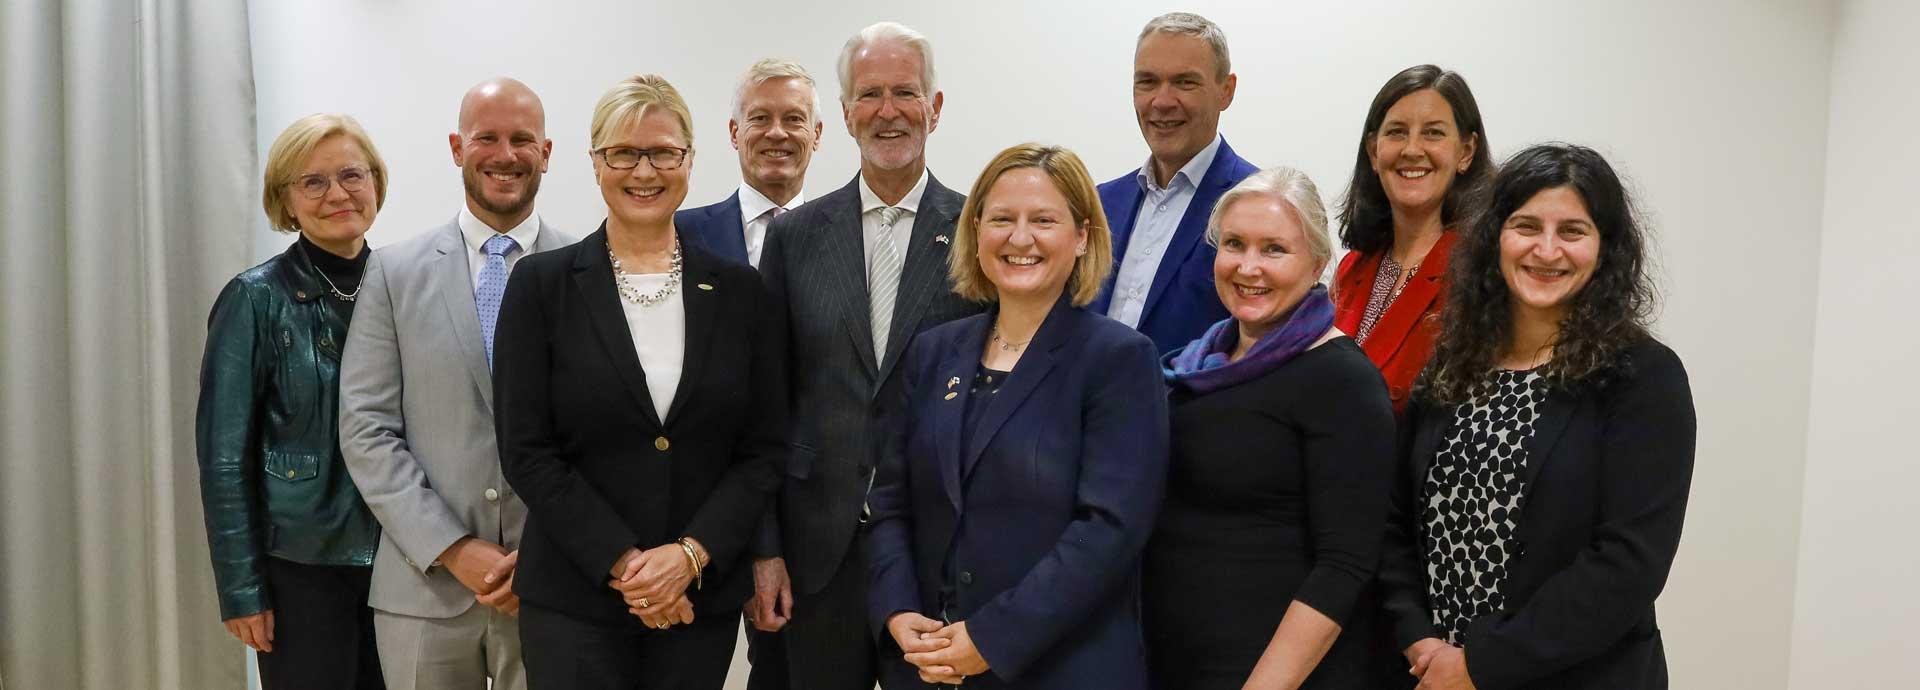 Group photo of the Fulbright Finland Foundation Board of Directors